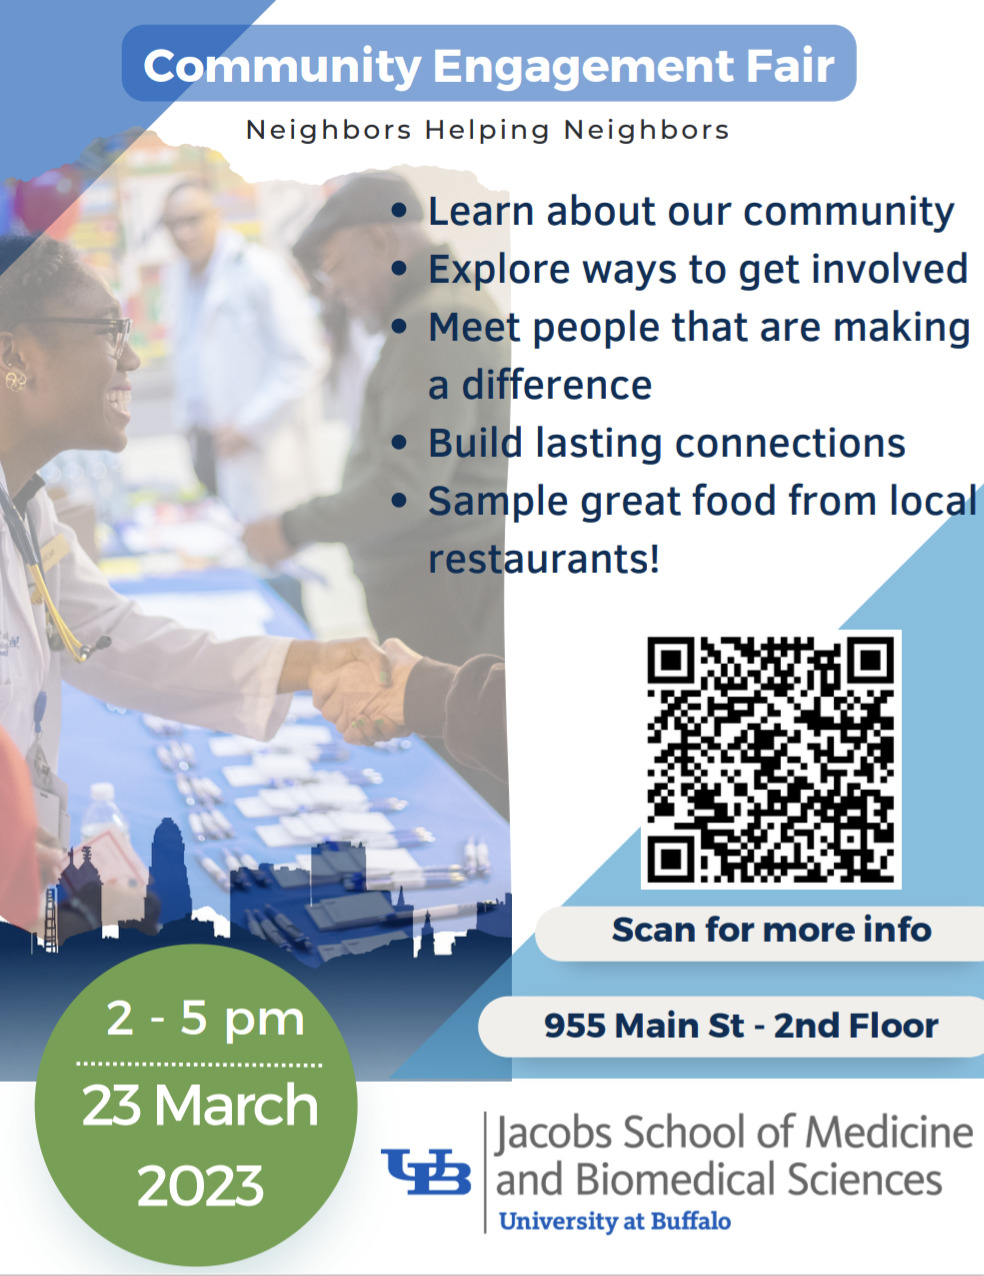 Join IIBUFF next Thursday, March 23, at the University at Buffalo’s 2023 Community Engagement Fair: “Neighbors Helping Neighbors,” hosted by the Jacobs School of Medicine and Biomedical Sciences.